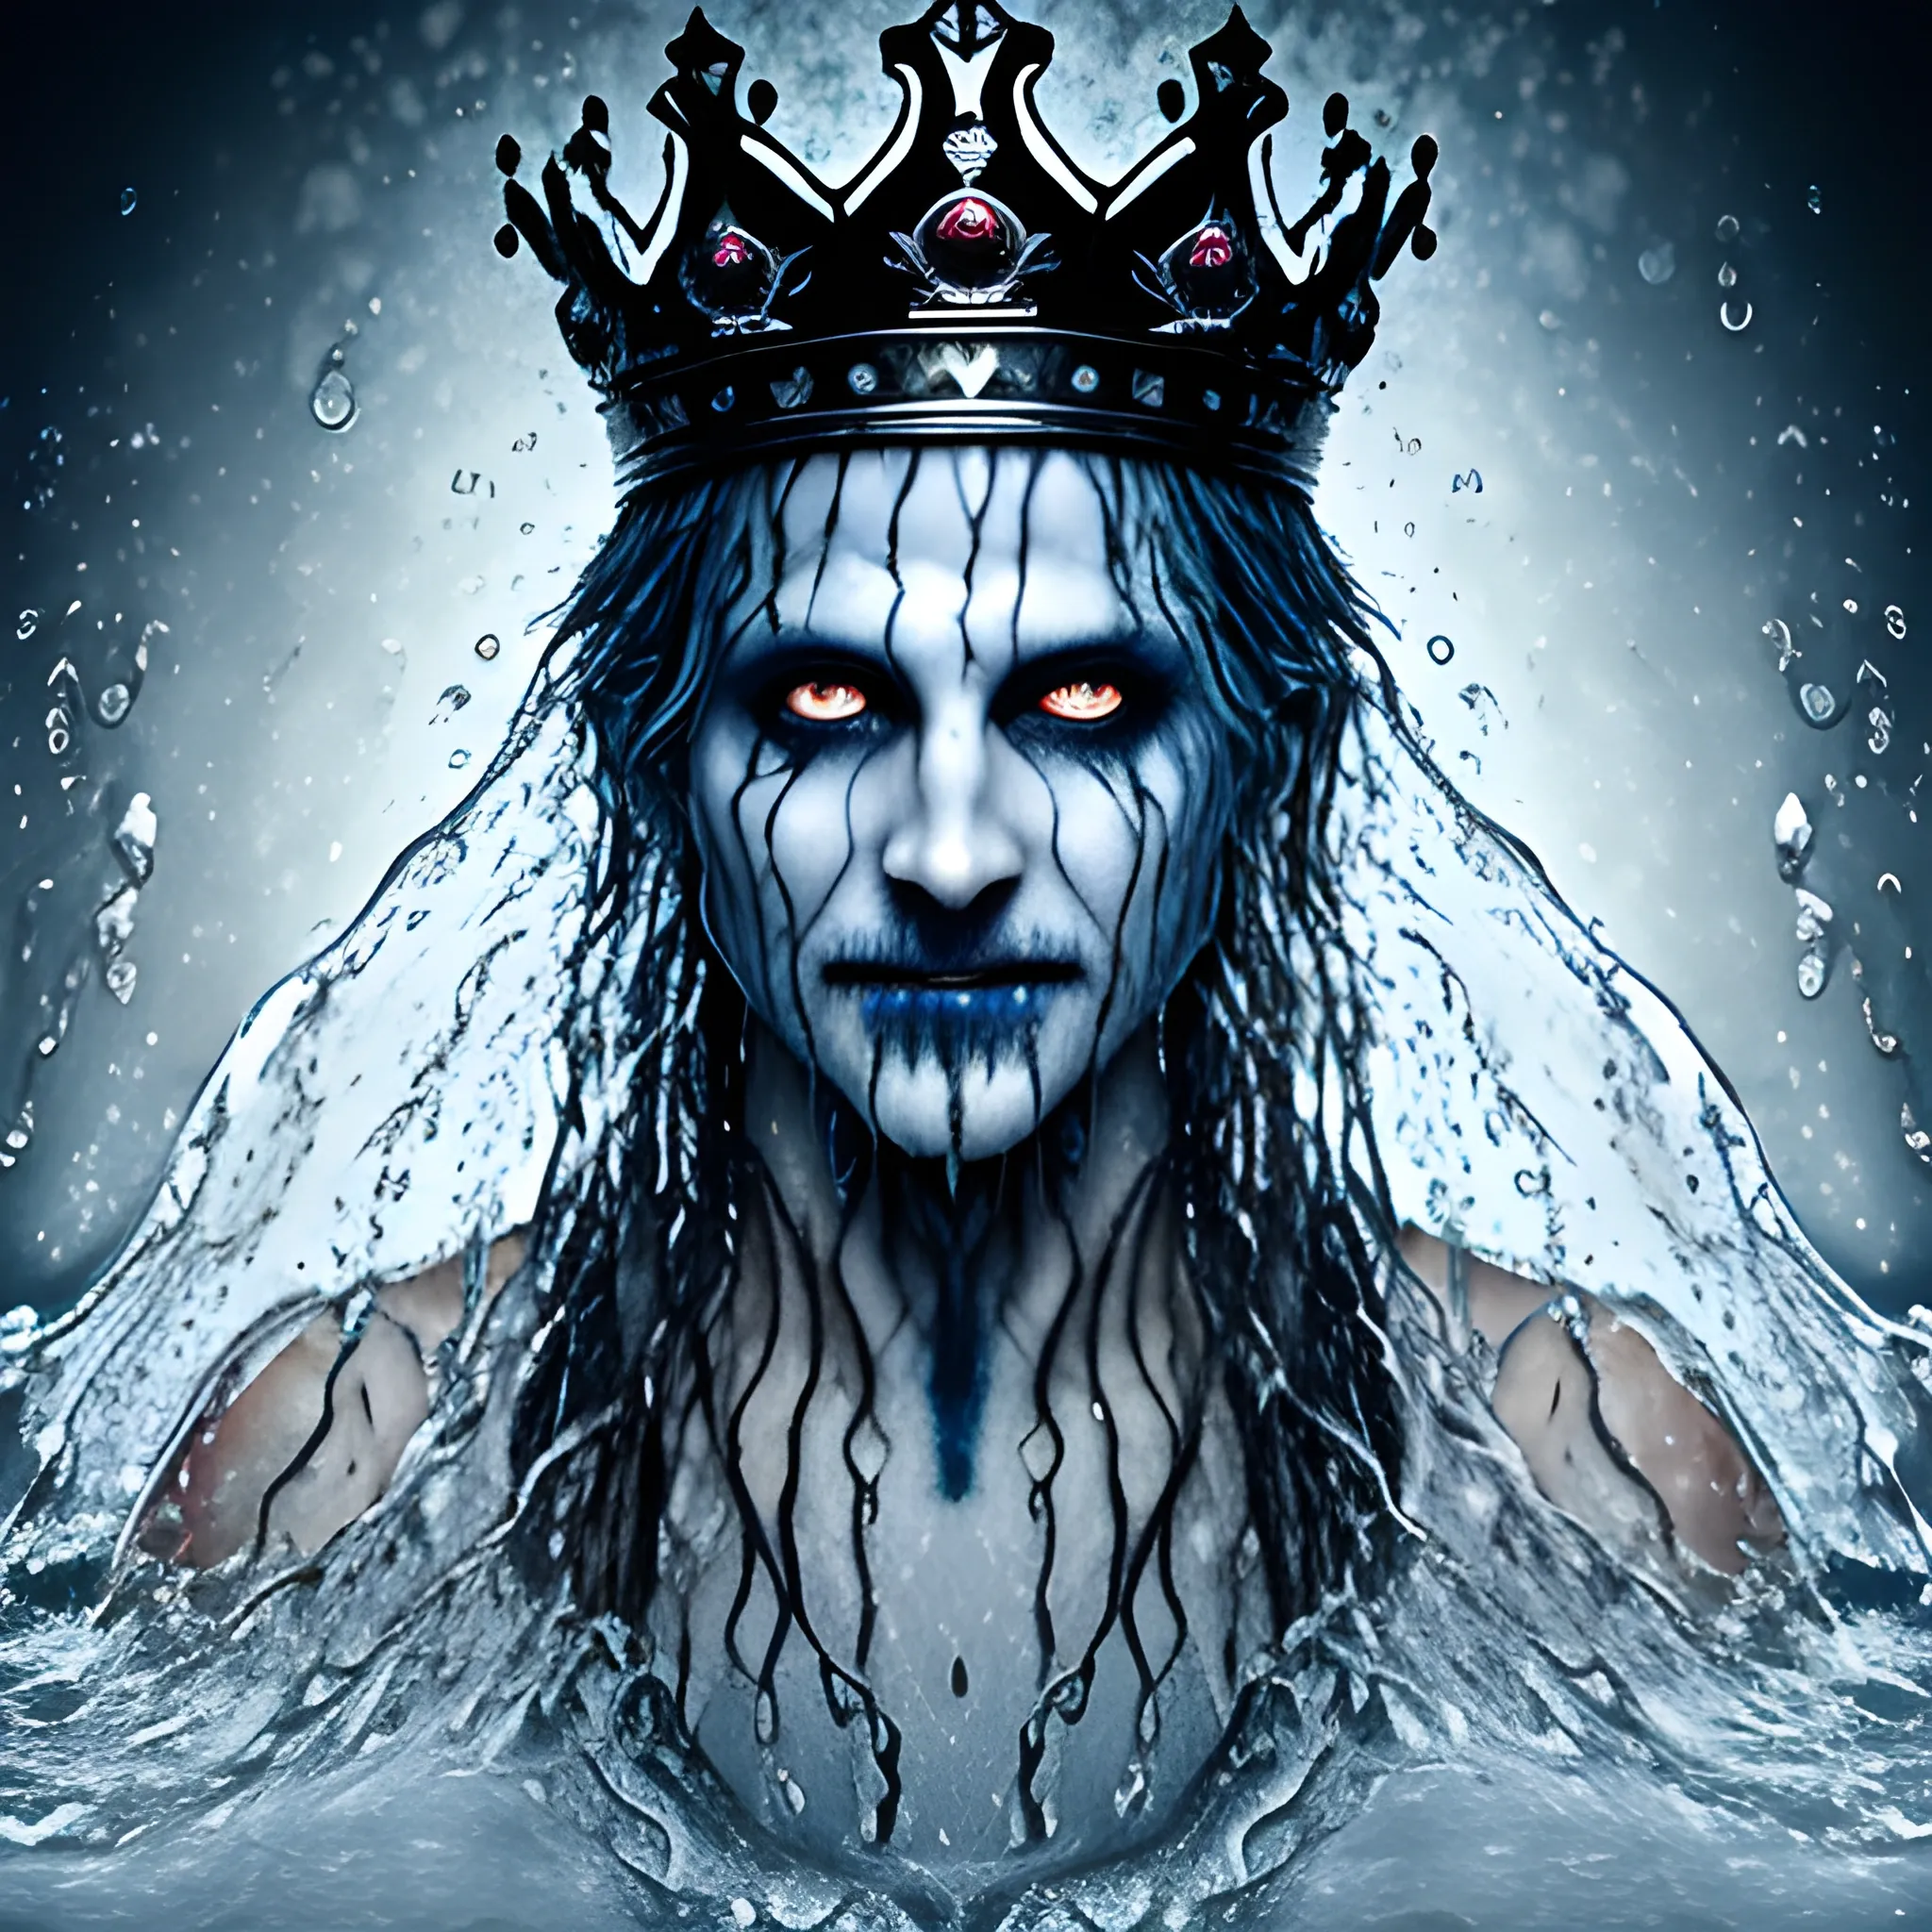 photorealistic image of the king of ghosts soaked in water with a black crown, full body, ominous smile, dimmed lighting, blue painted wet hair, wet makeup, evil grim, bokeh lighting